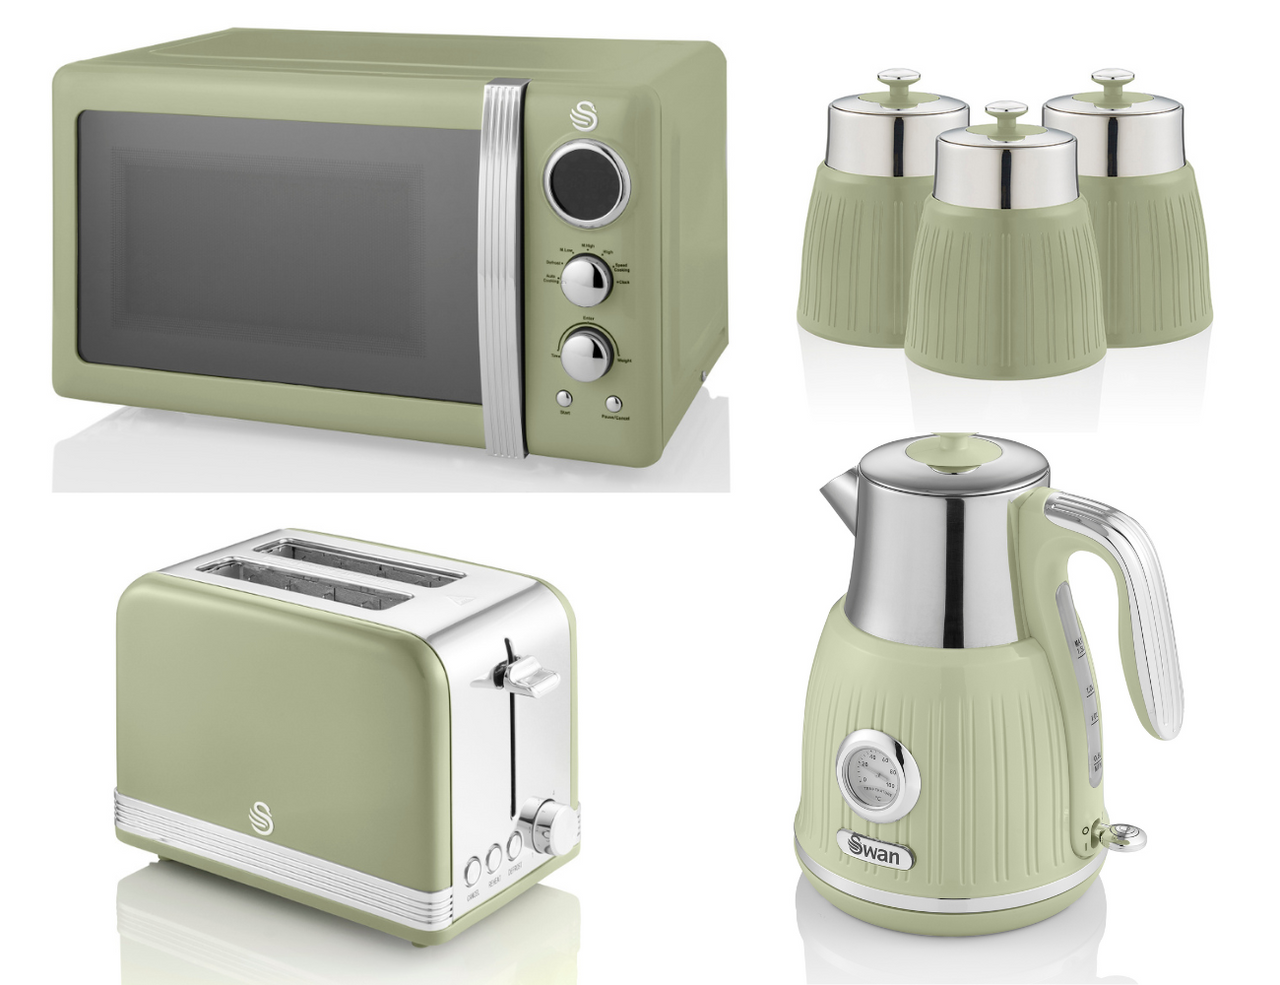 SWAN Retro Green Dial Kettle 2 Slice Toaster Microwave & 3 Canisters Kitchen Set